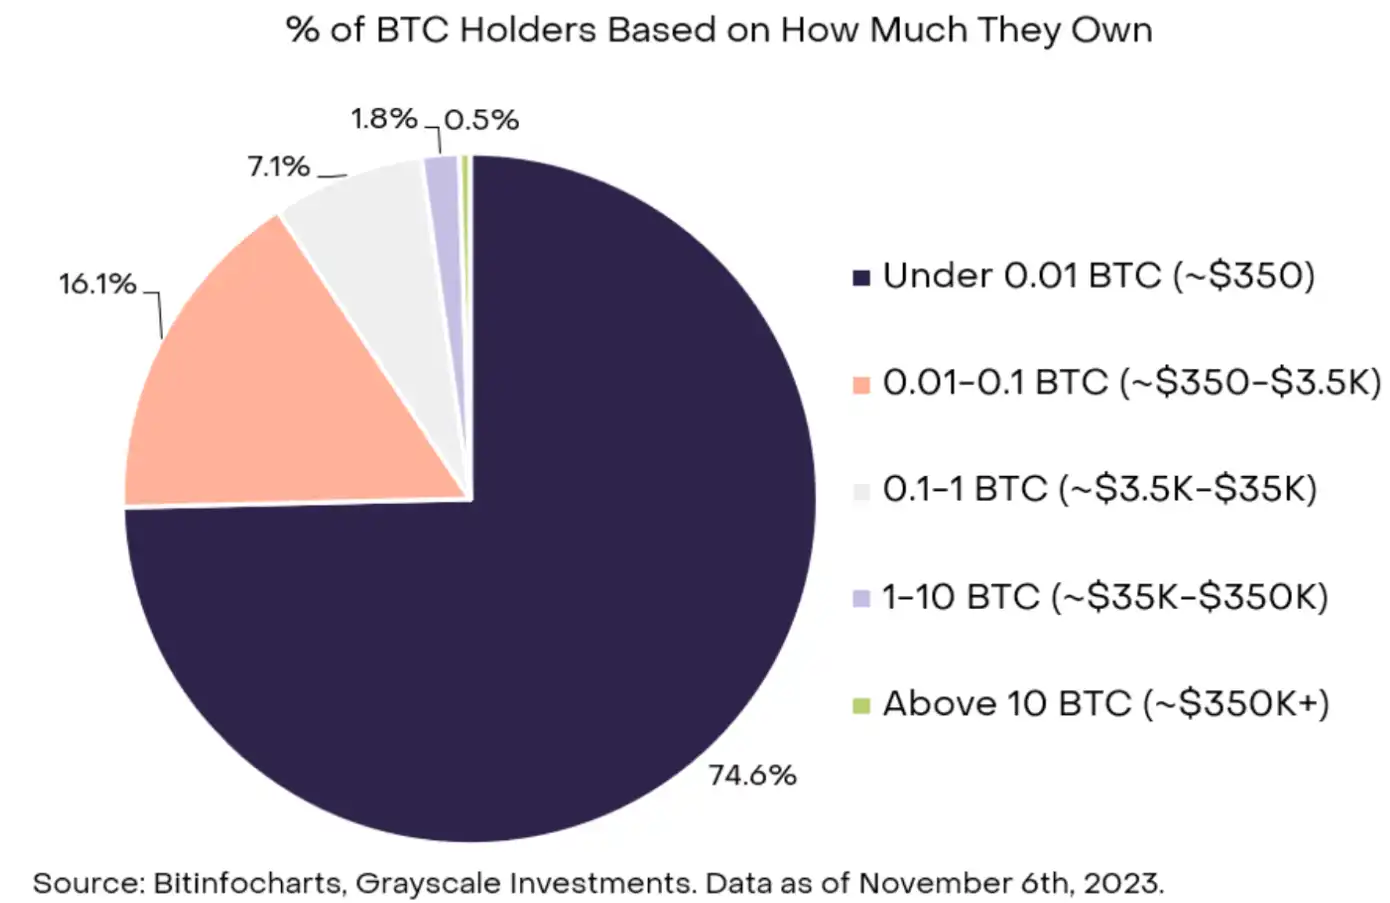 Grayscale Research: Demystifying Bitcoin’s Ownership Landscape